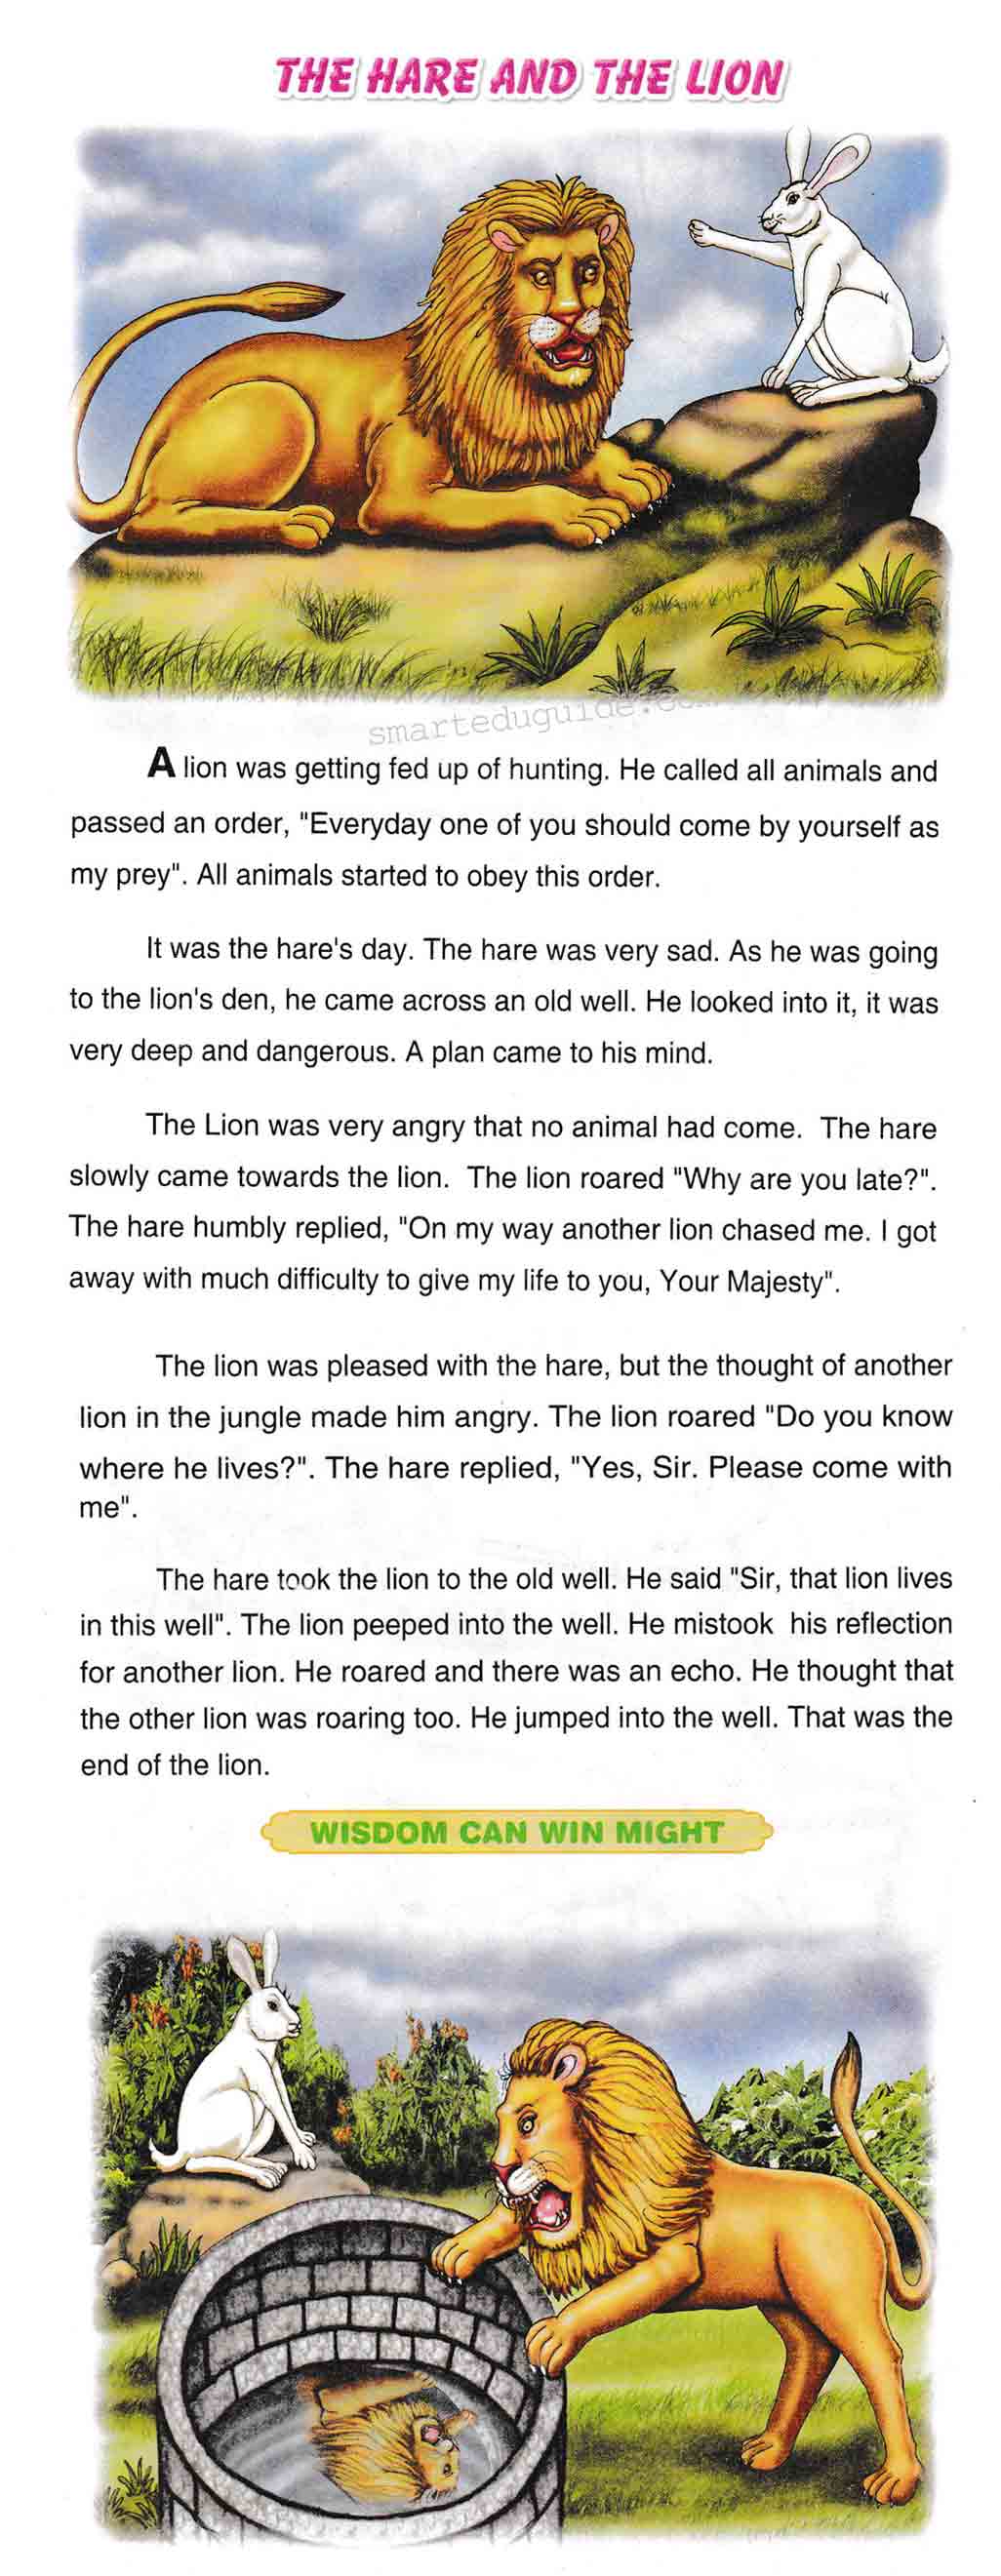 The Hare and the Lion kids easy English short stories Pdf free | The Hare and  the Lion kids easy English short stories Pdf freeSEG